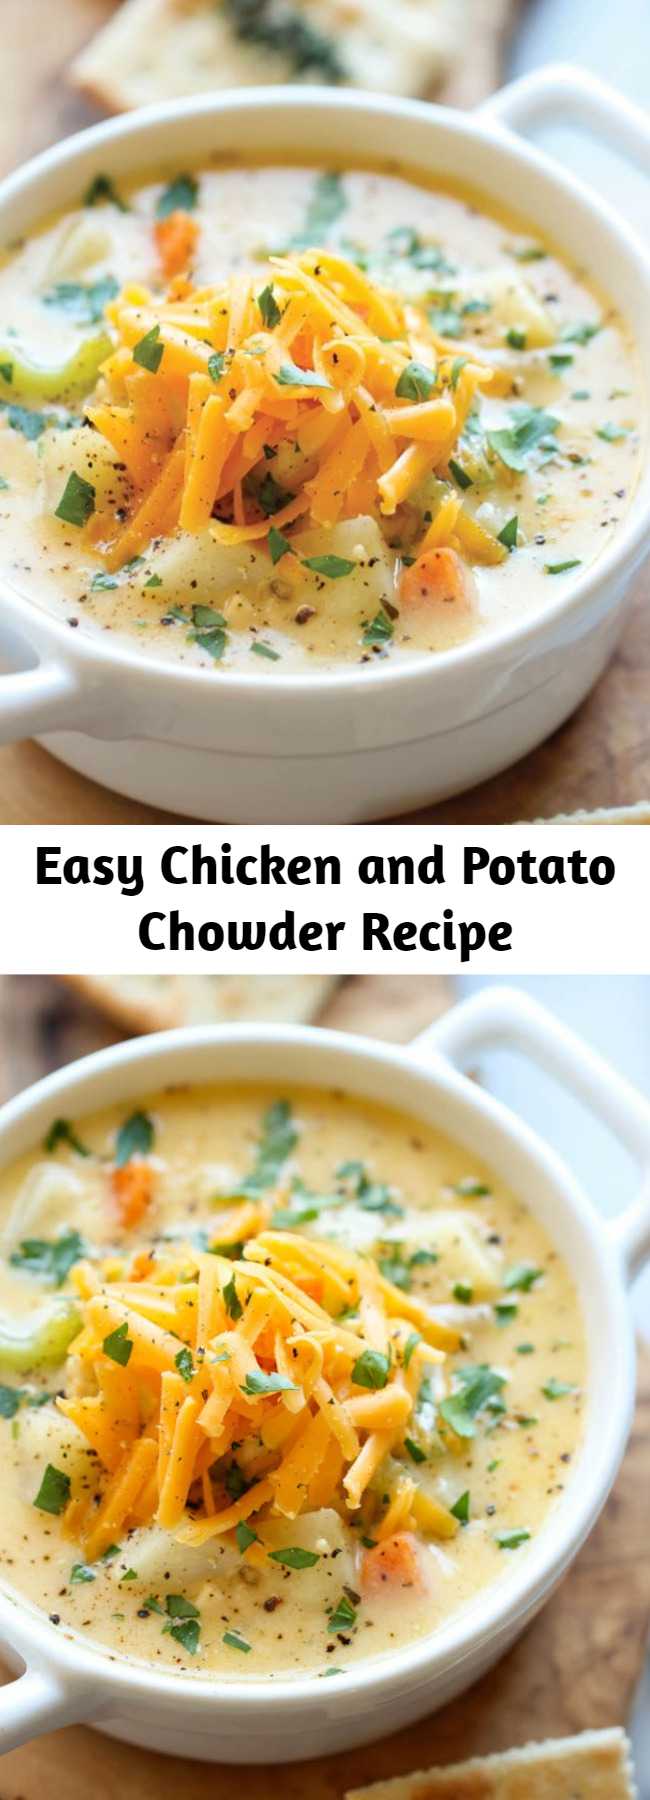 Easy Chicken and Potato Chowder Recipe - This is just like mom’s comforting chicken noodle soup, but it’s even creamier and loaded with cheesy goodness!